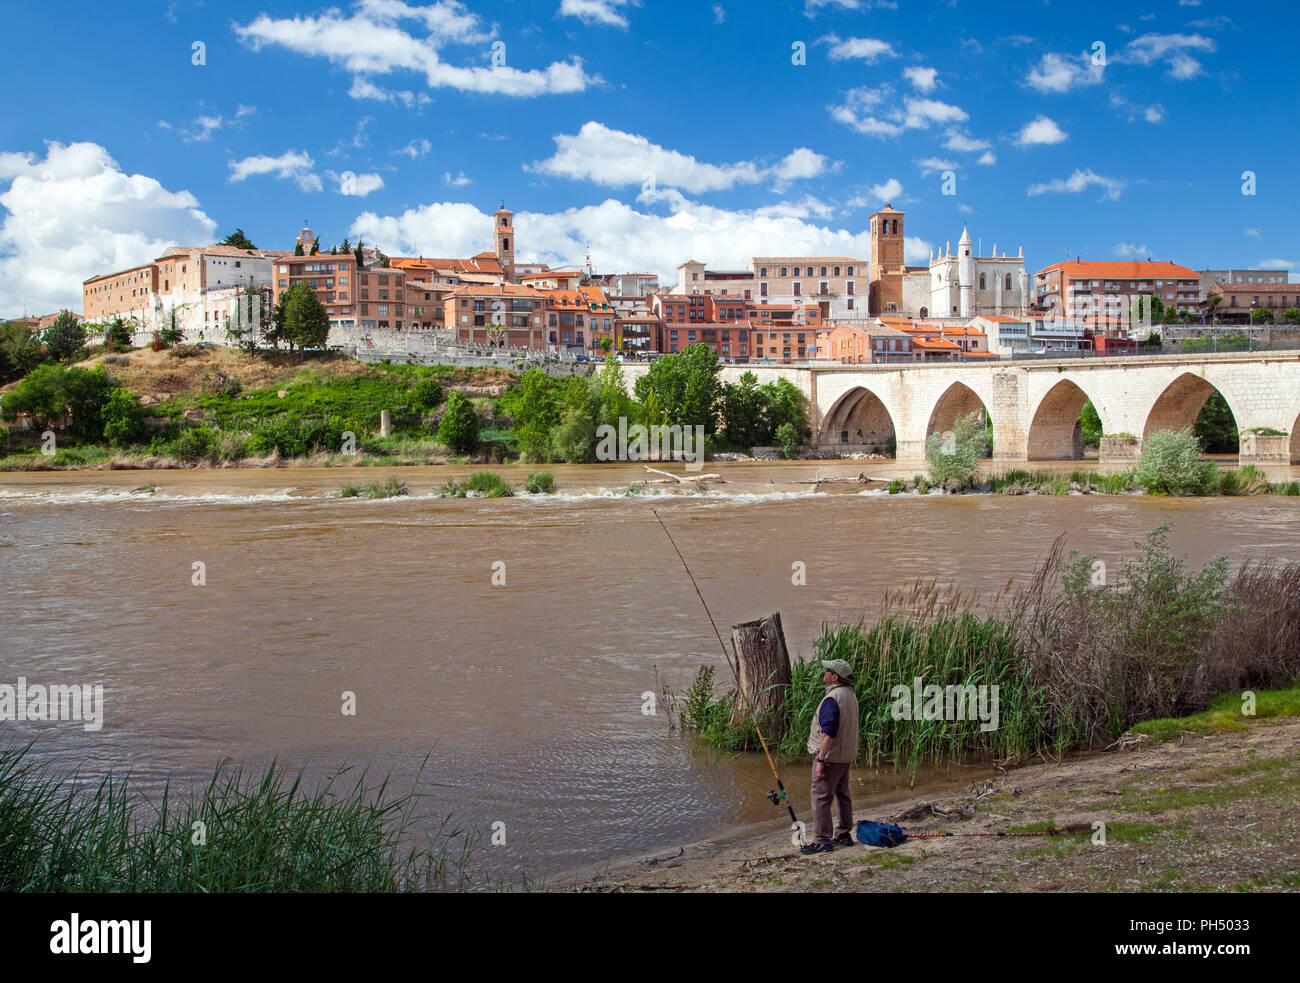 Man fishing from  the man made beach on the river Douro with a view of the medieval town of Tordesillas in the distance Spain Stock Photo